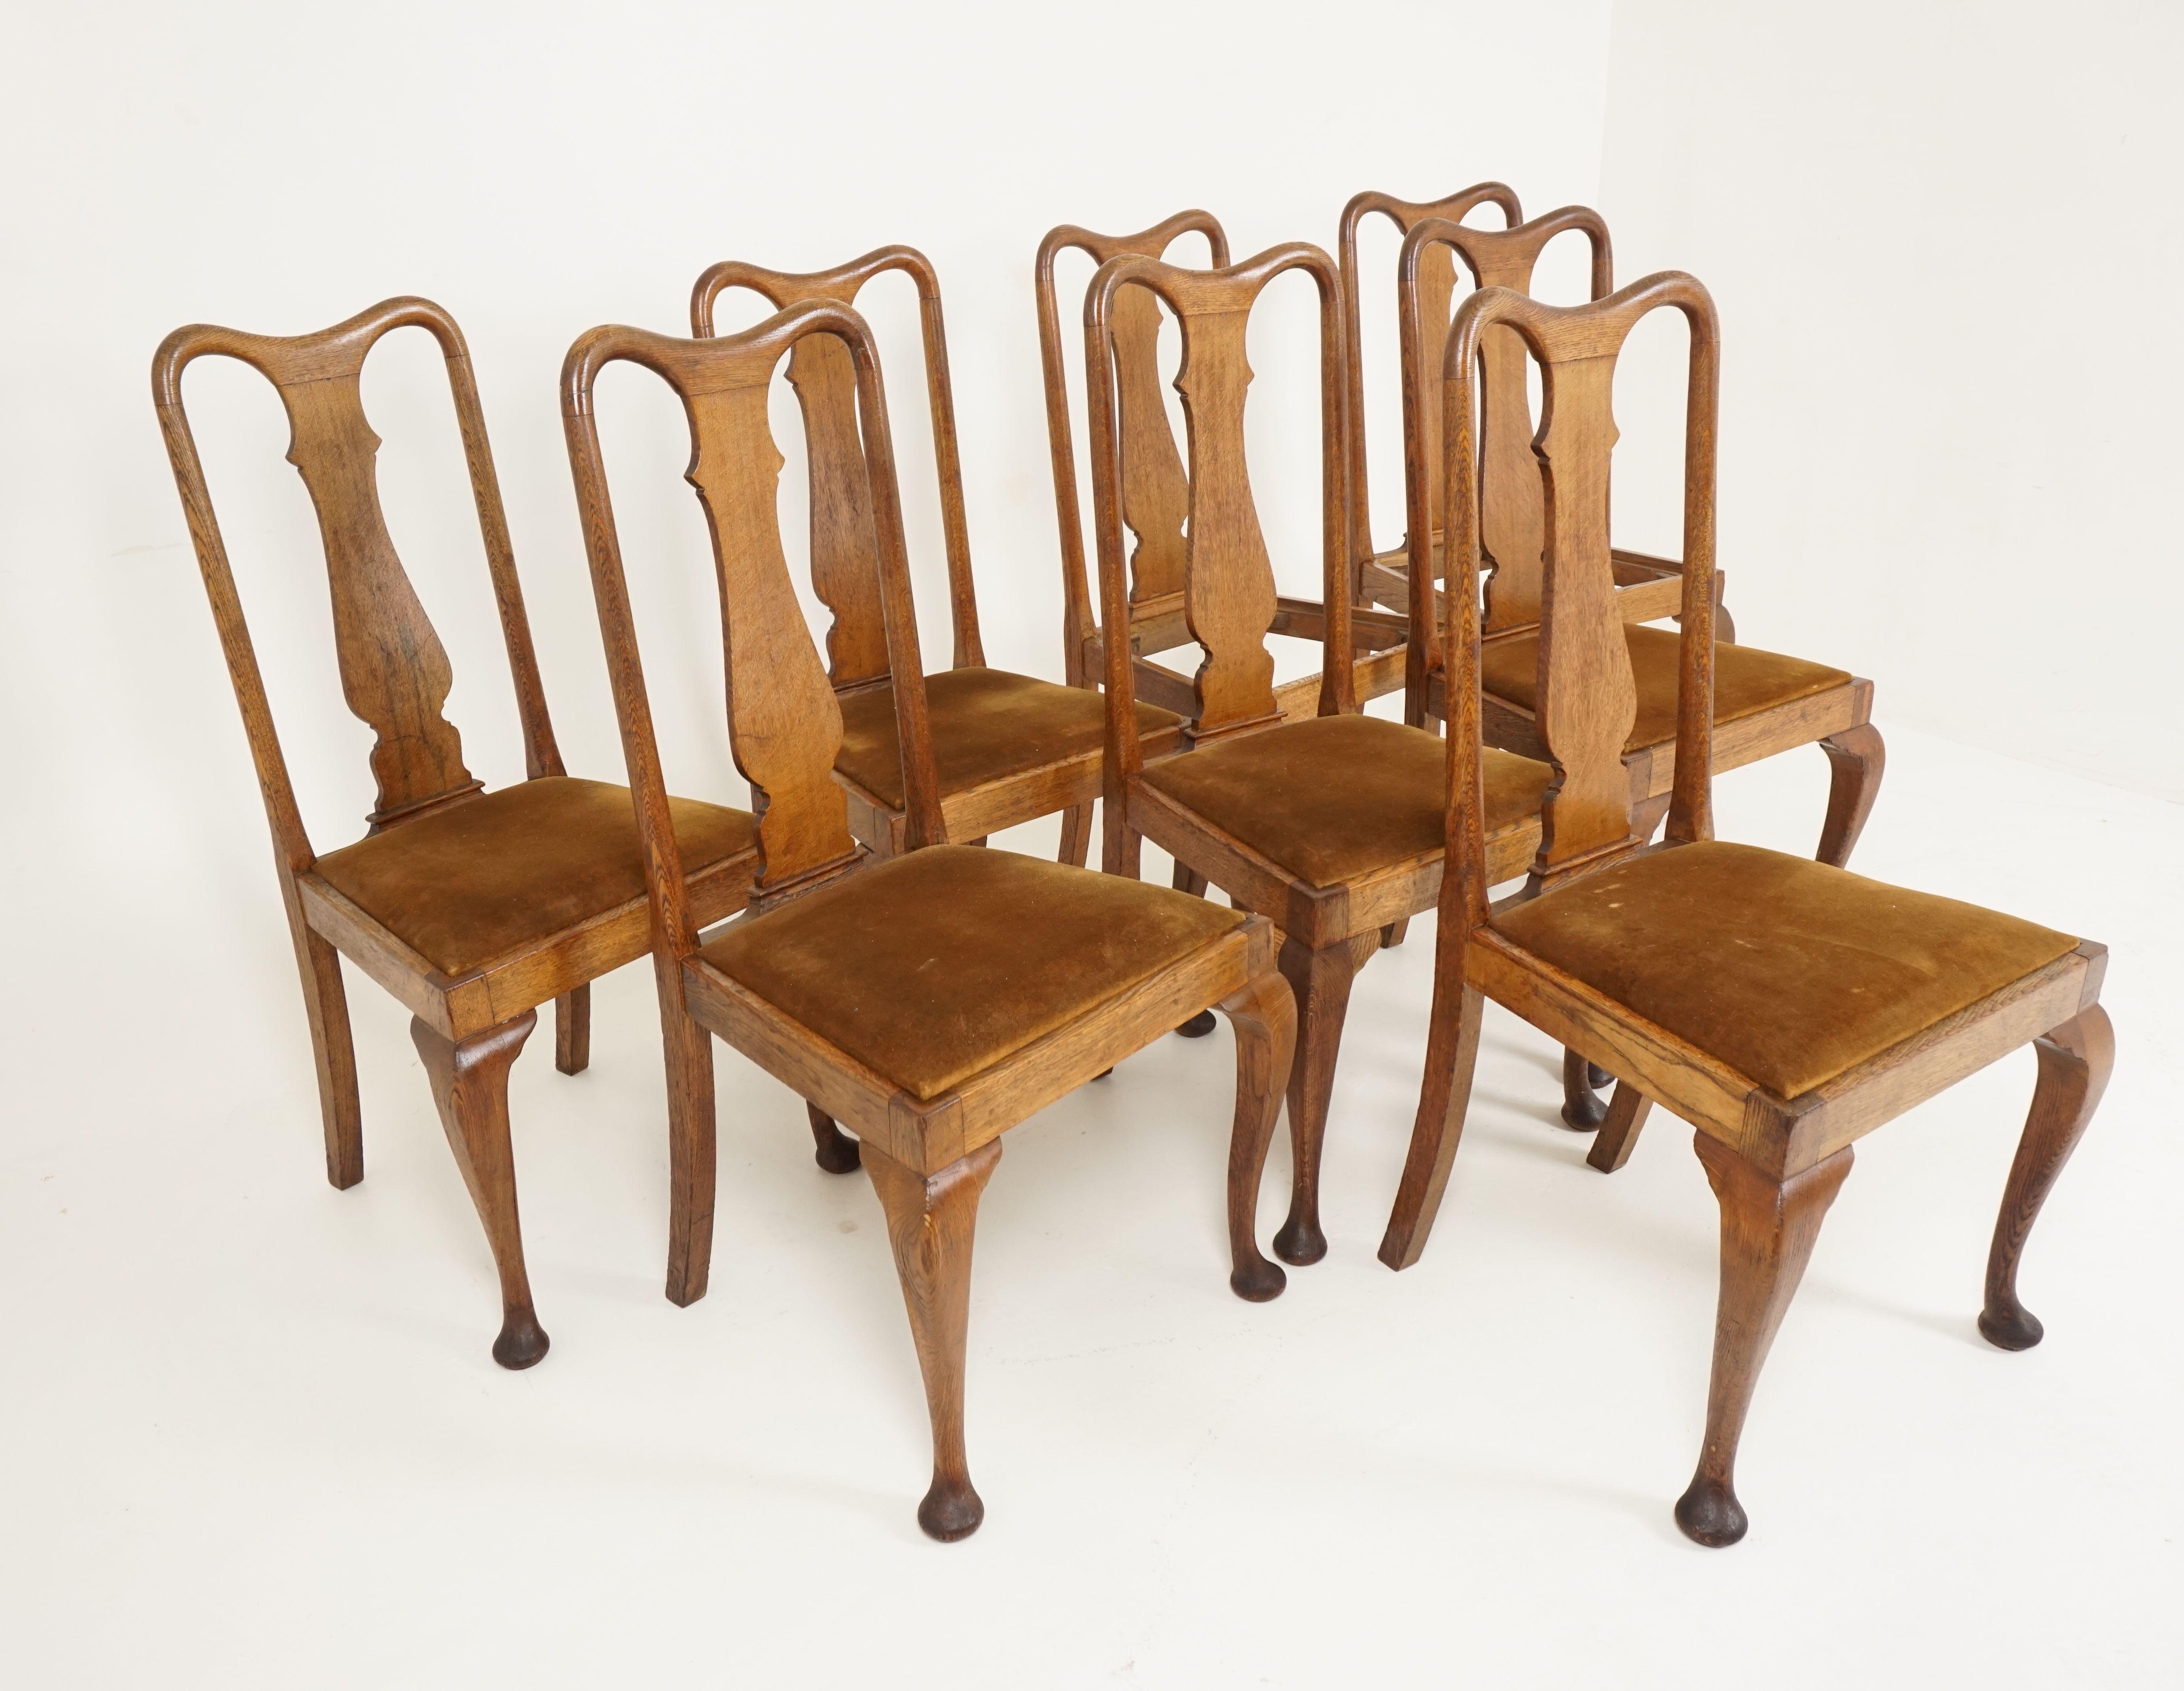 Scottish Antique Set of Chairs, Queen Anne Style, Oak, 8 Chairs, Scotland 1910, B2327